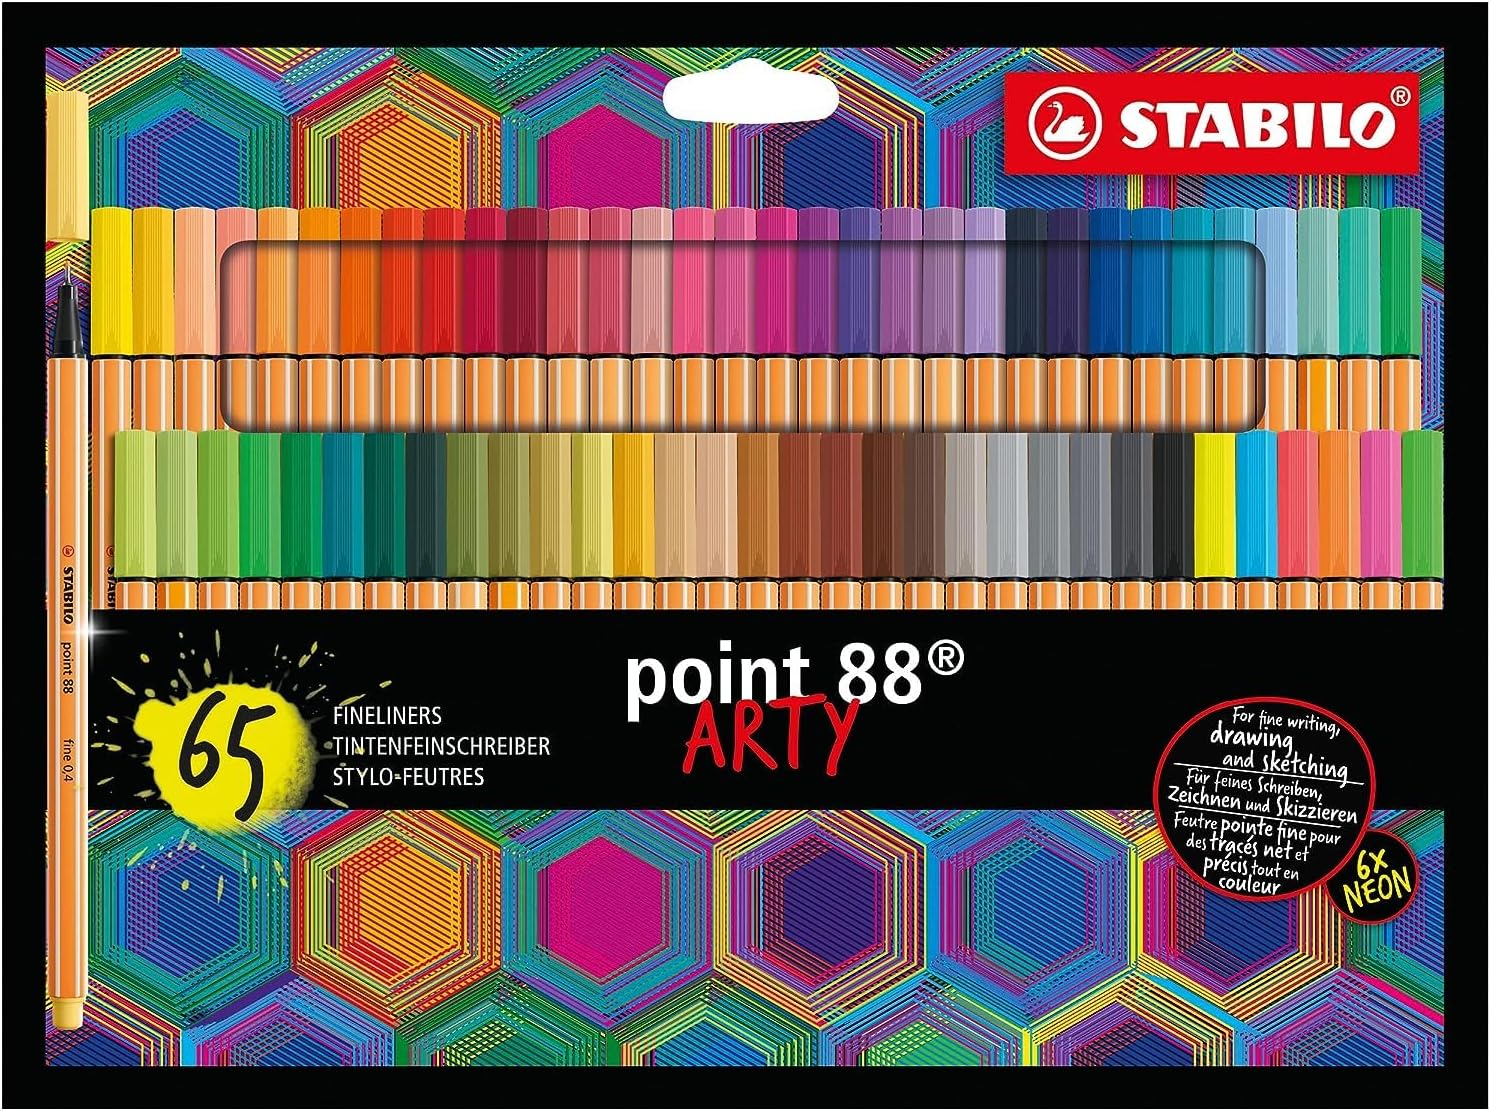 stabilo point 88 fineliner pens review best pens where the ink has lasted more than 7 years planner pens with long lasting ink